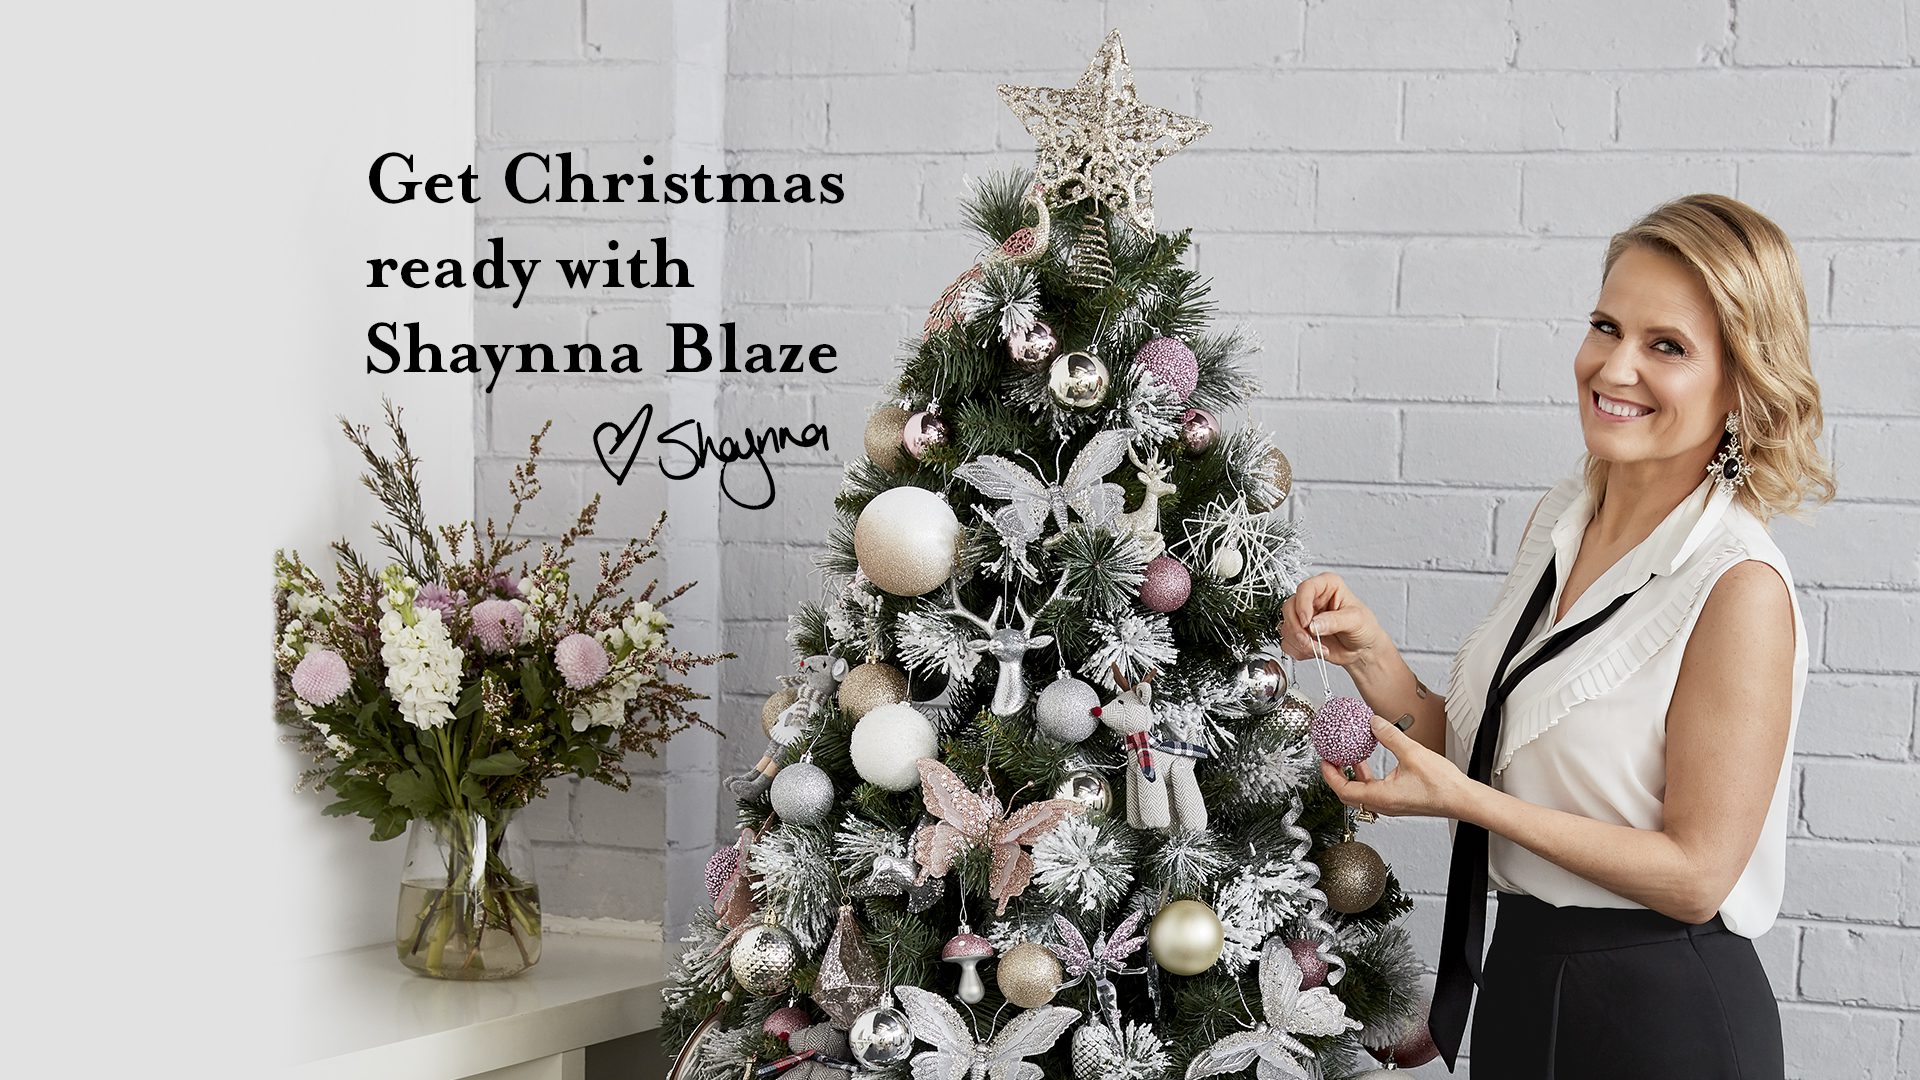 Getting the home into the holiday spirit with Shaynna Blaze